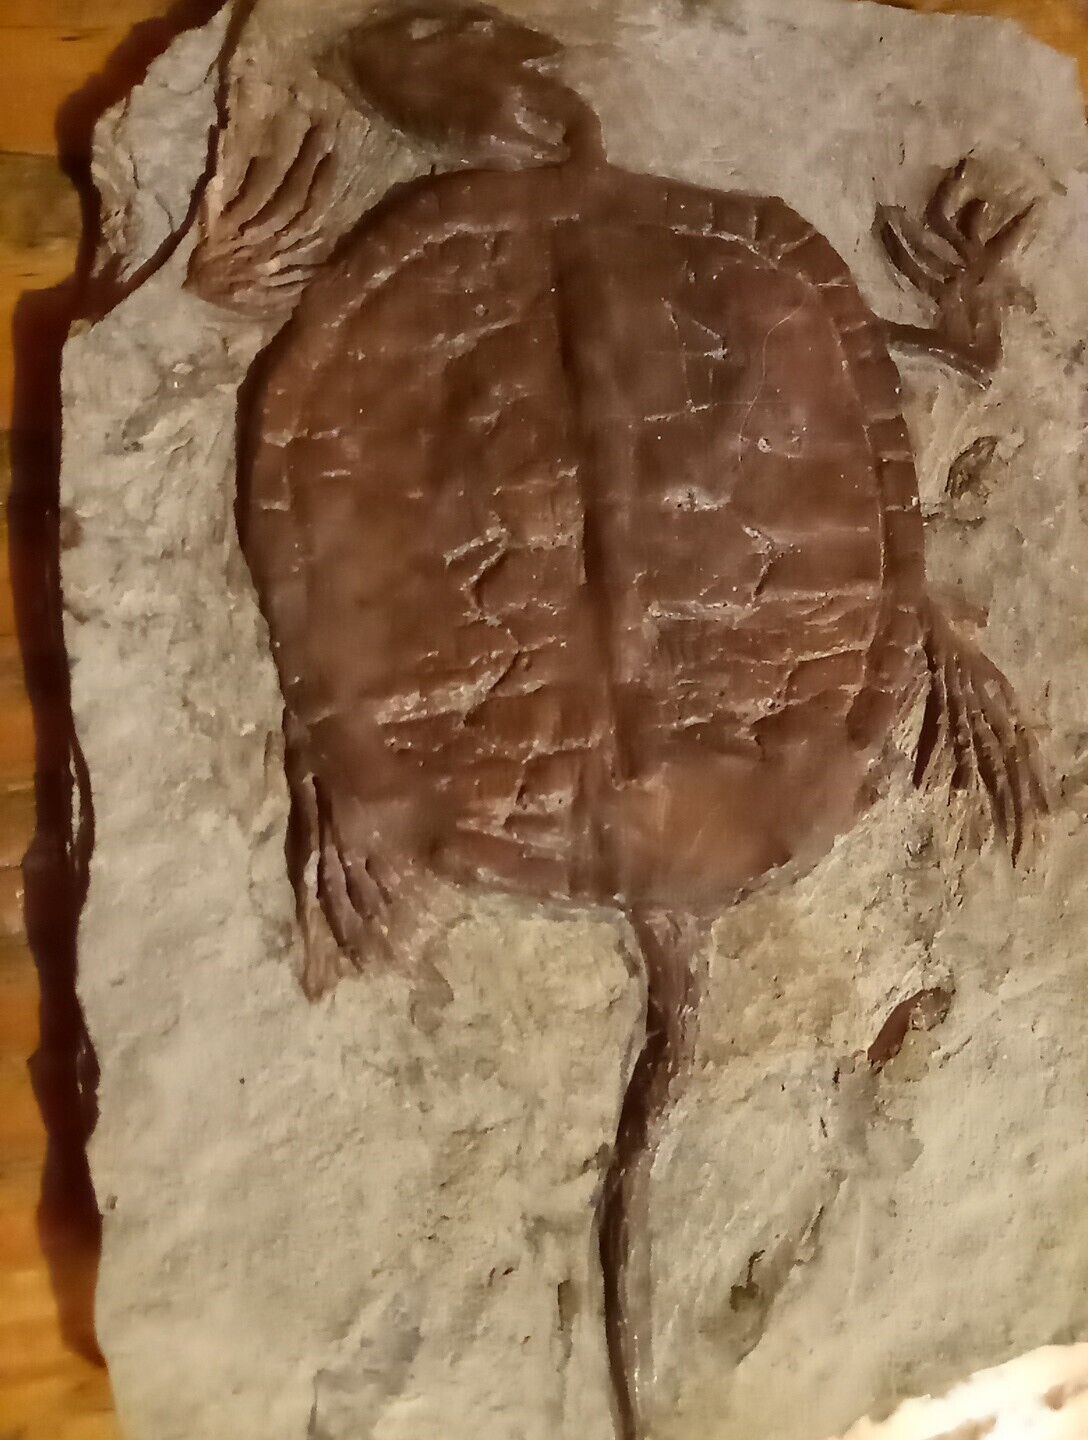 Manchurochelys liaoxiensis Turtle Fossil- Real Fossils From Mongolia Collection 